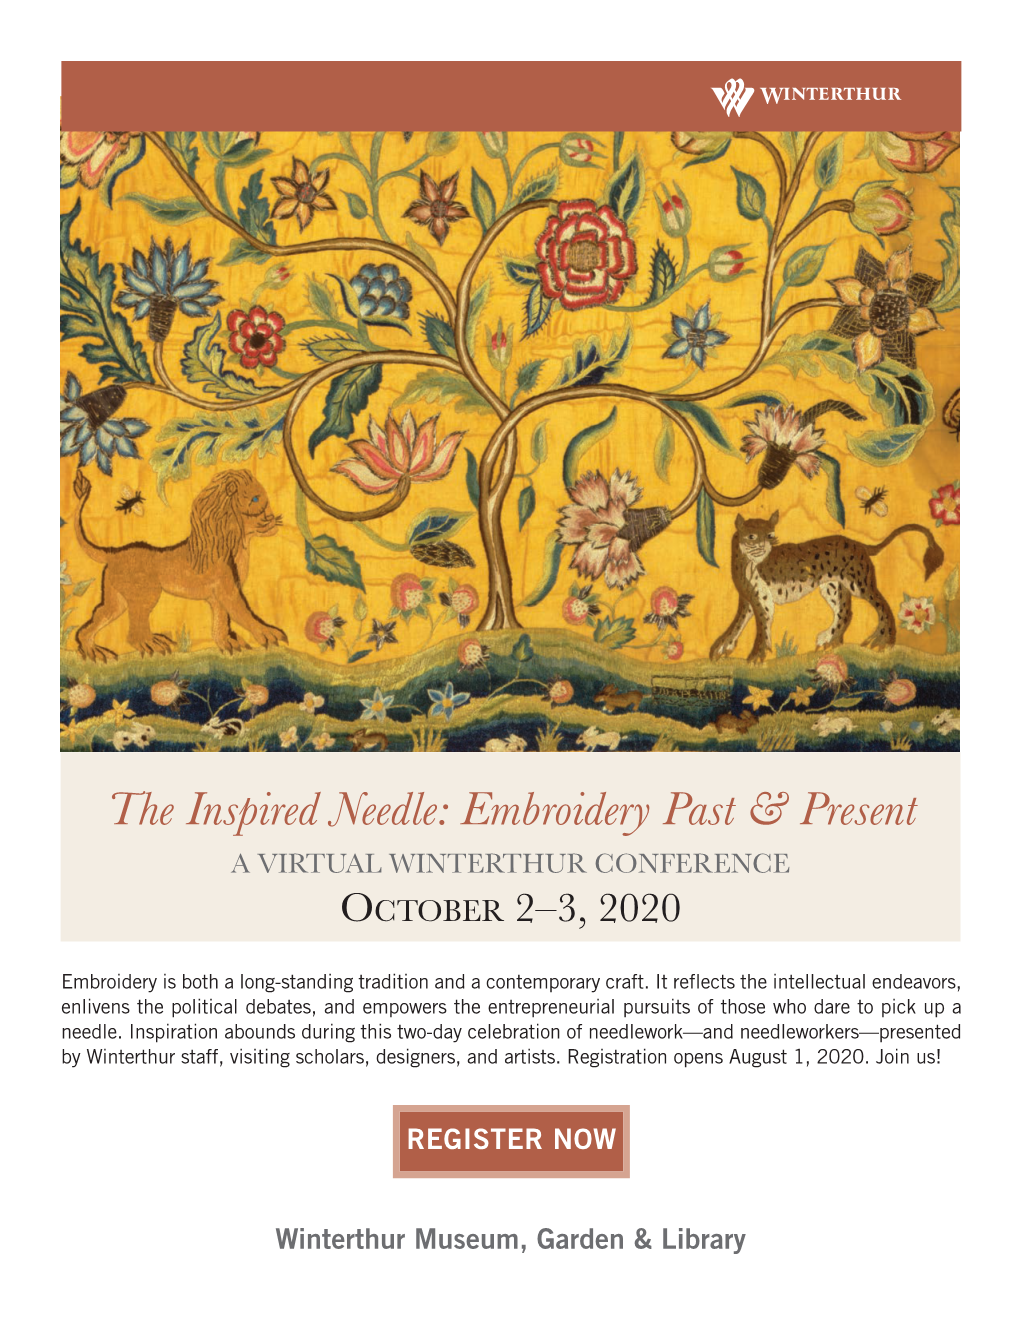 The Inspired Needle: Embroidery Past & Present a VIRTUAL WINTERTHUR CONFERENCE OCTOBER 2–3, 2020